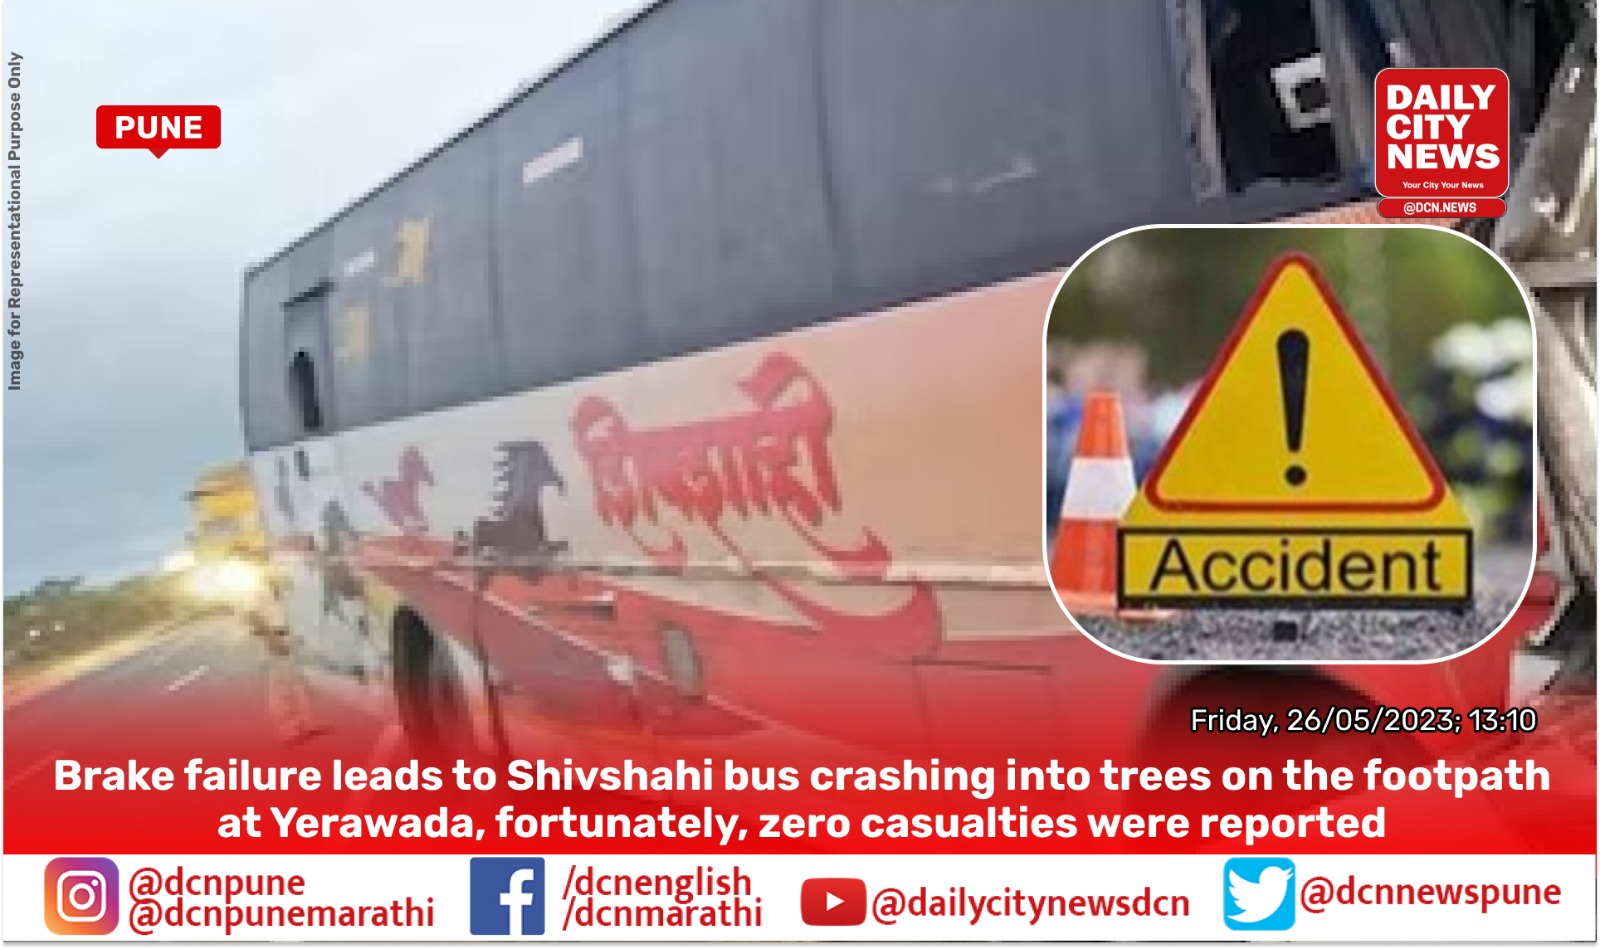 Brake failure leads to Shivshahi bus crashing into trees on the footpath at Yerawada, fortunately, zero casualties were reported